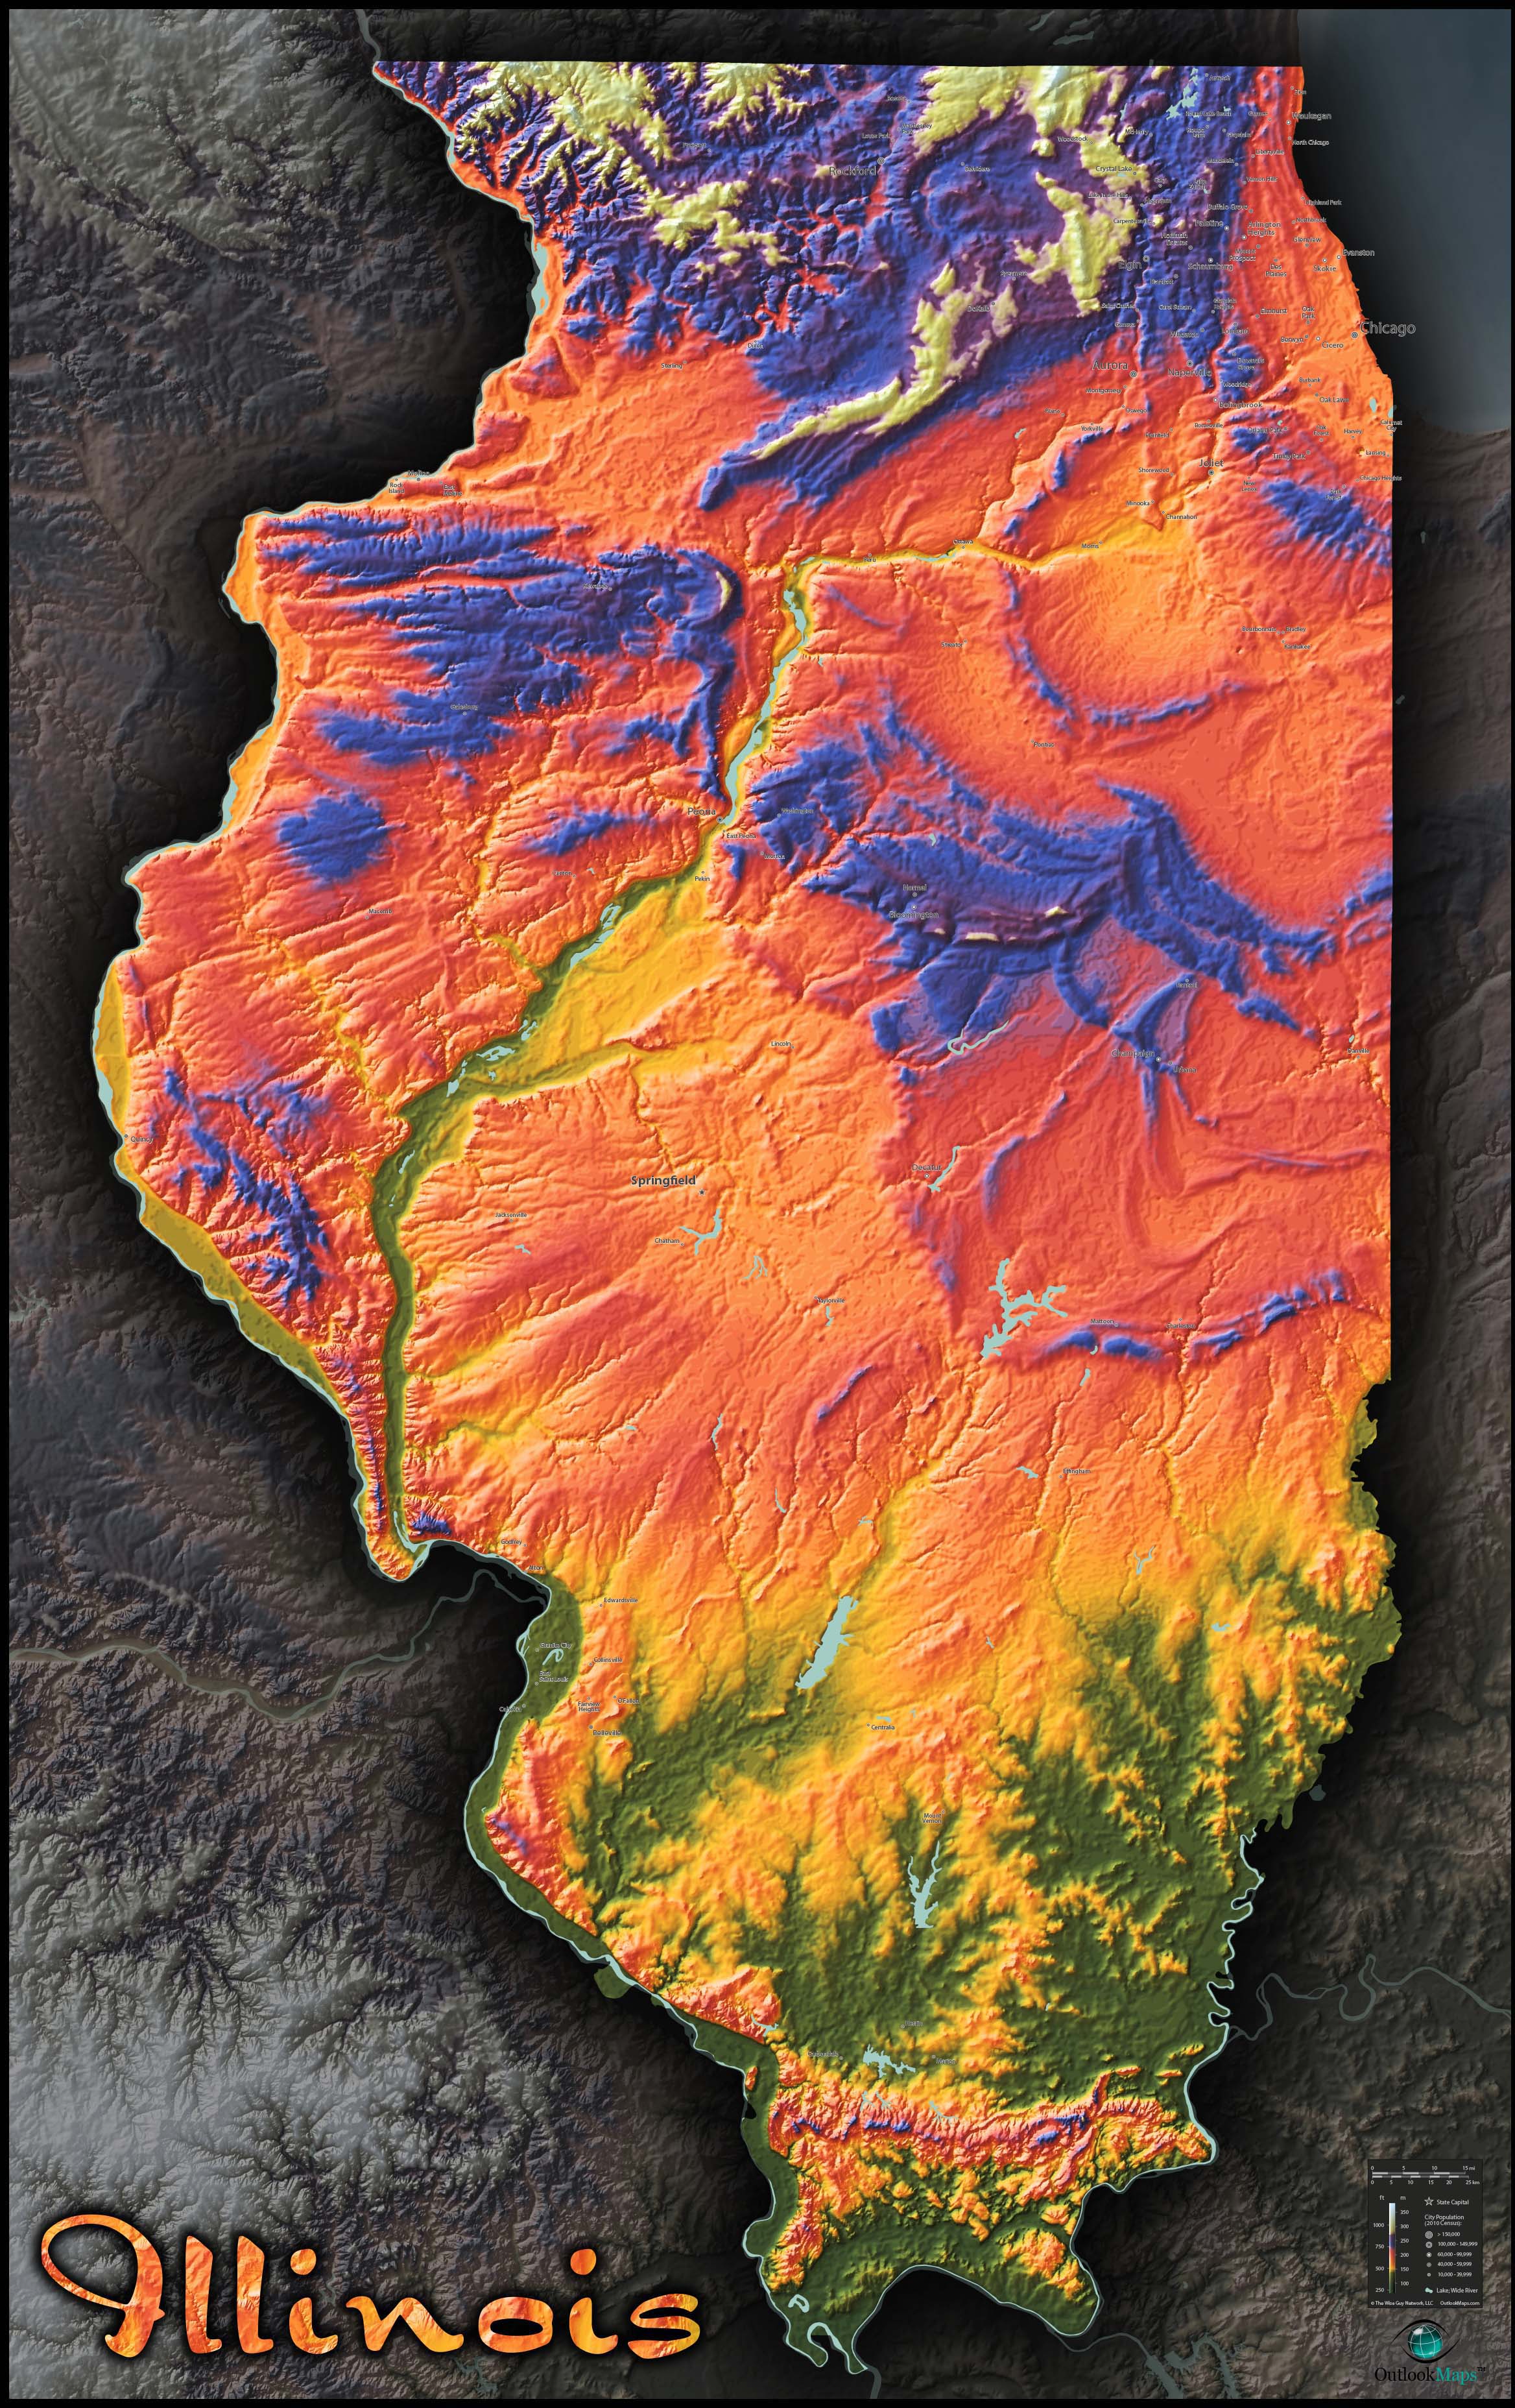 Illinois Topo Wall Map by Outlook Maps MapSales